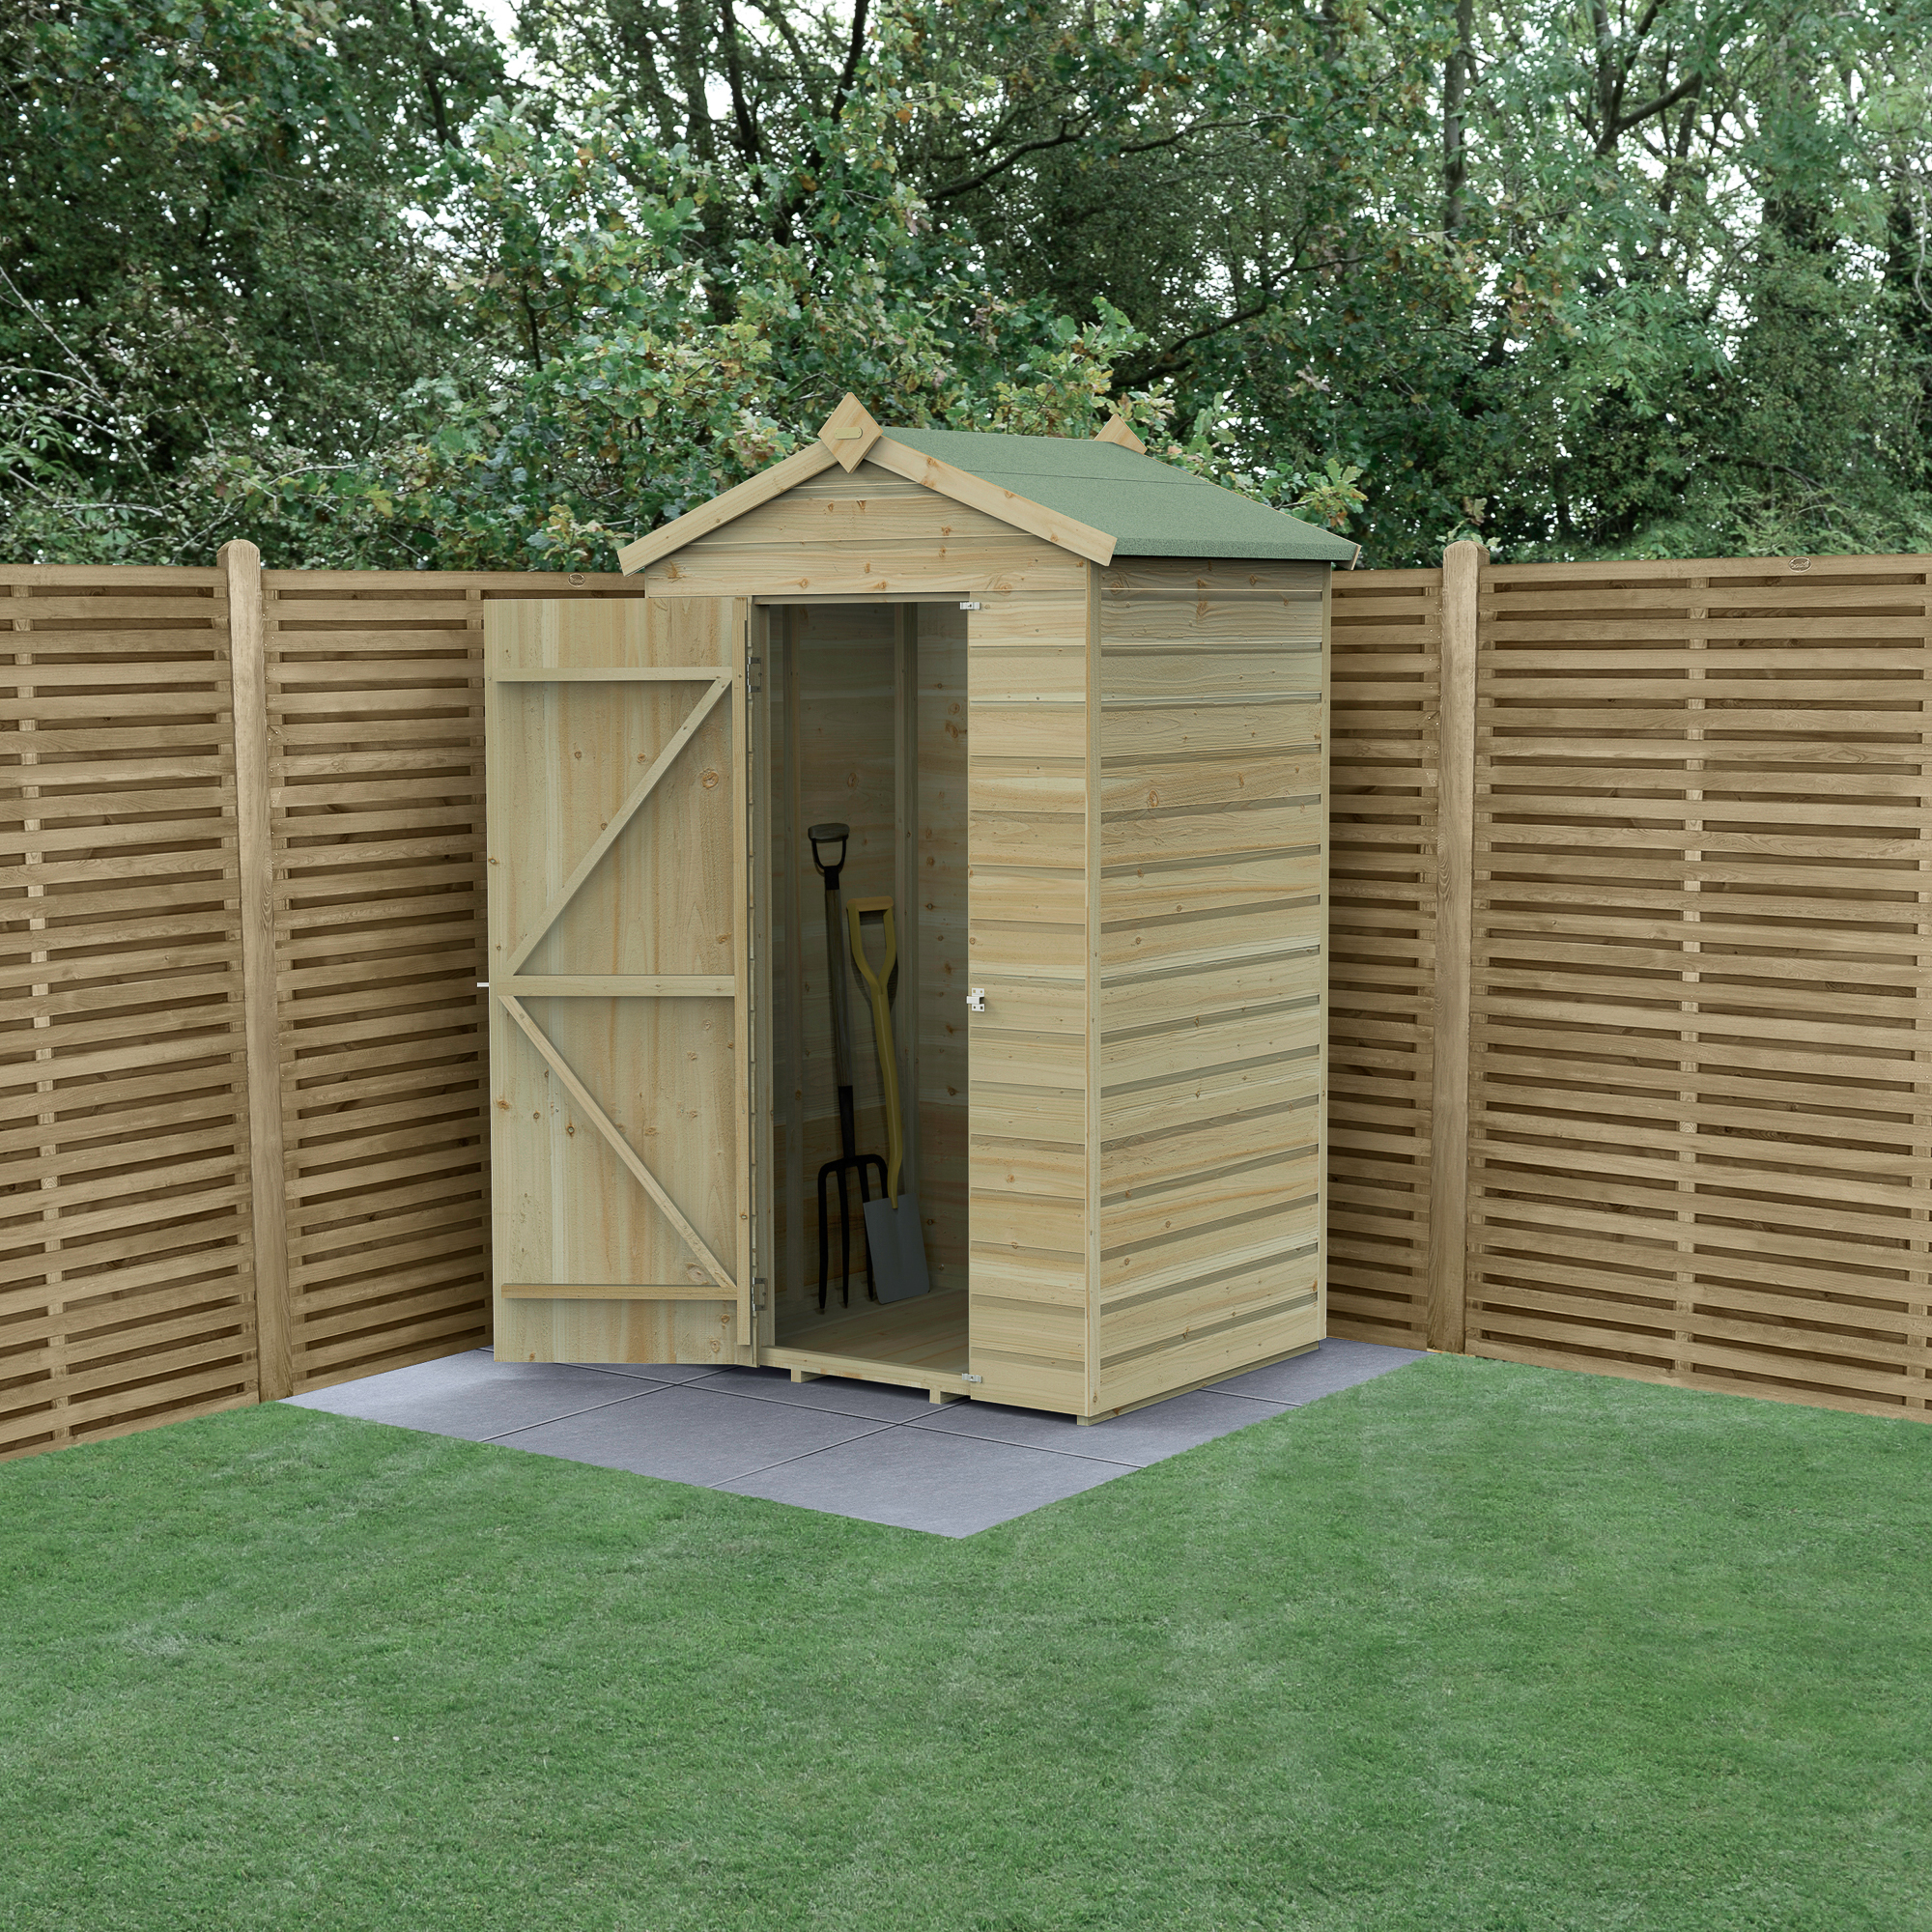 Forest Garden Beckwood 4 x 3ft Apex Shiplap Pressure Treated Windowless Shed